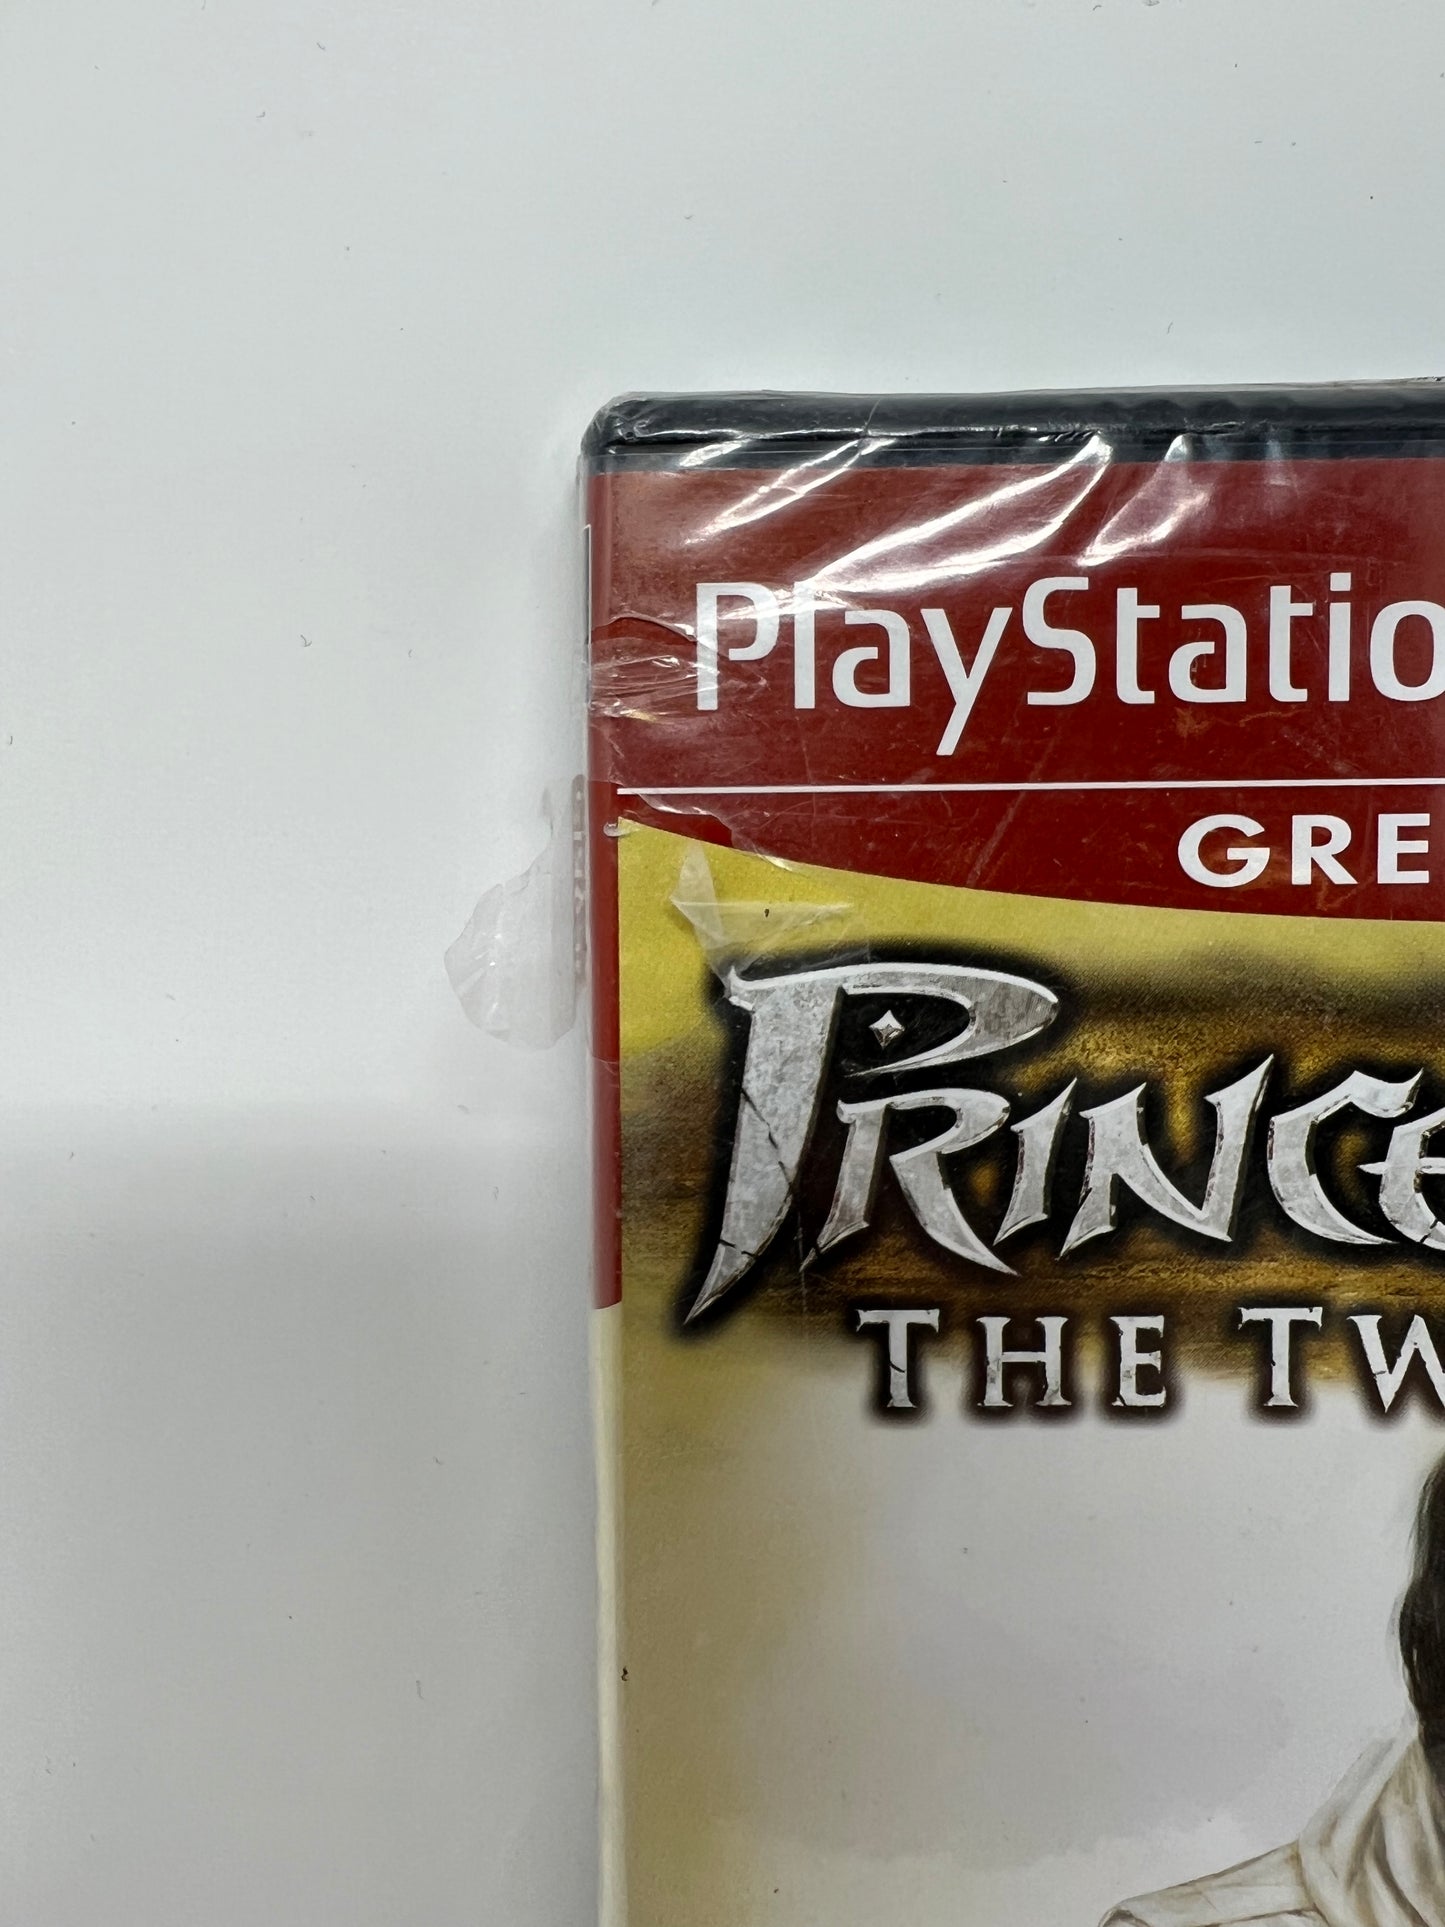 Prince of Persia The Two Thrones (Greatest Hits) - PS2 Game - Used